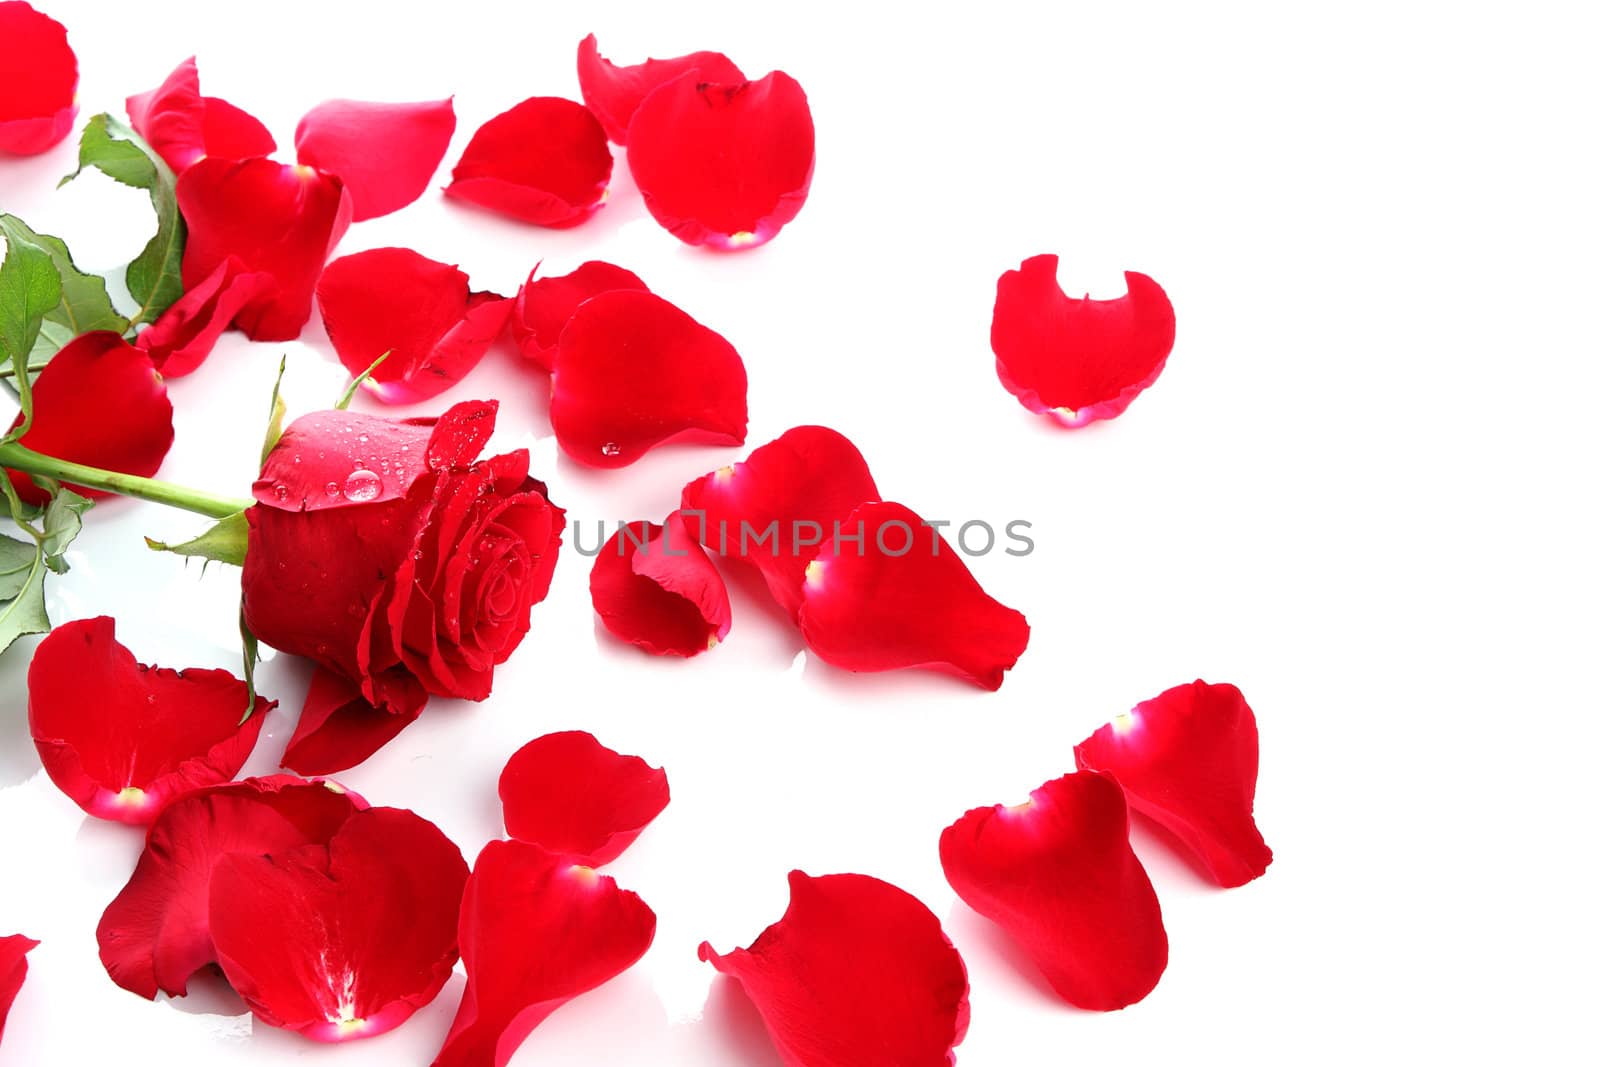 Red Rose & Petals with blank copy space on white